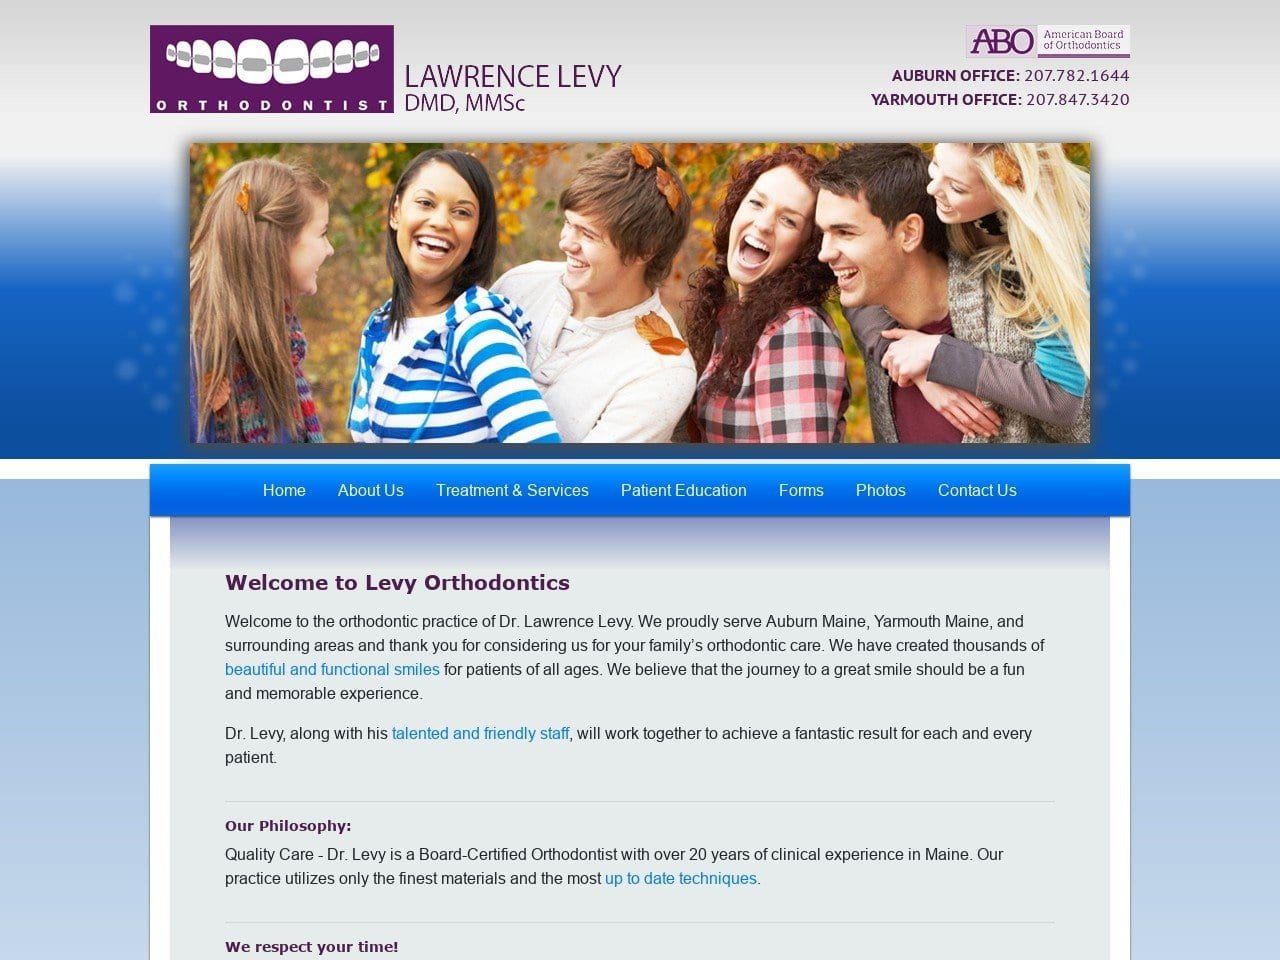 Levy Orthodontics Levy Lawrence E DDS Website Screenshot from levyorthodontics.com